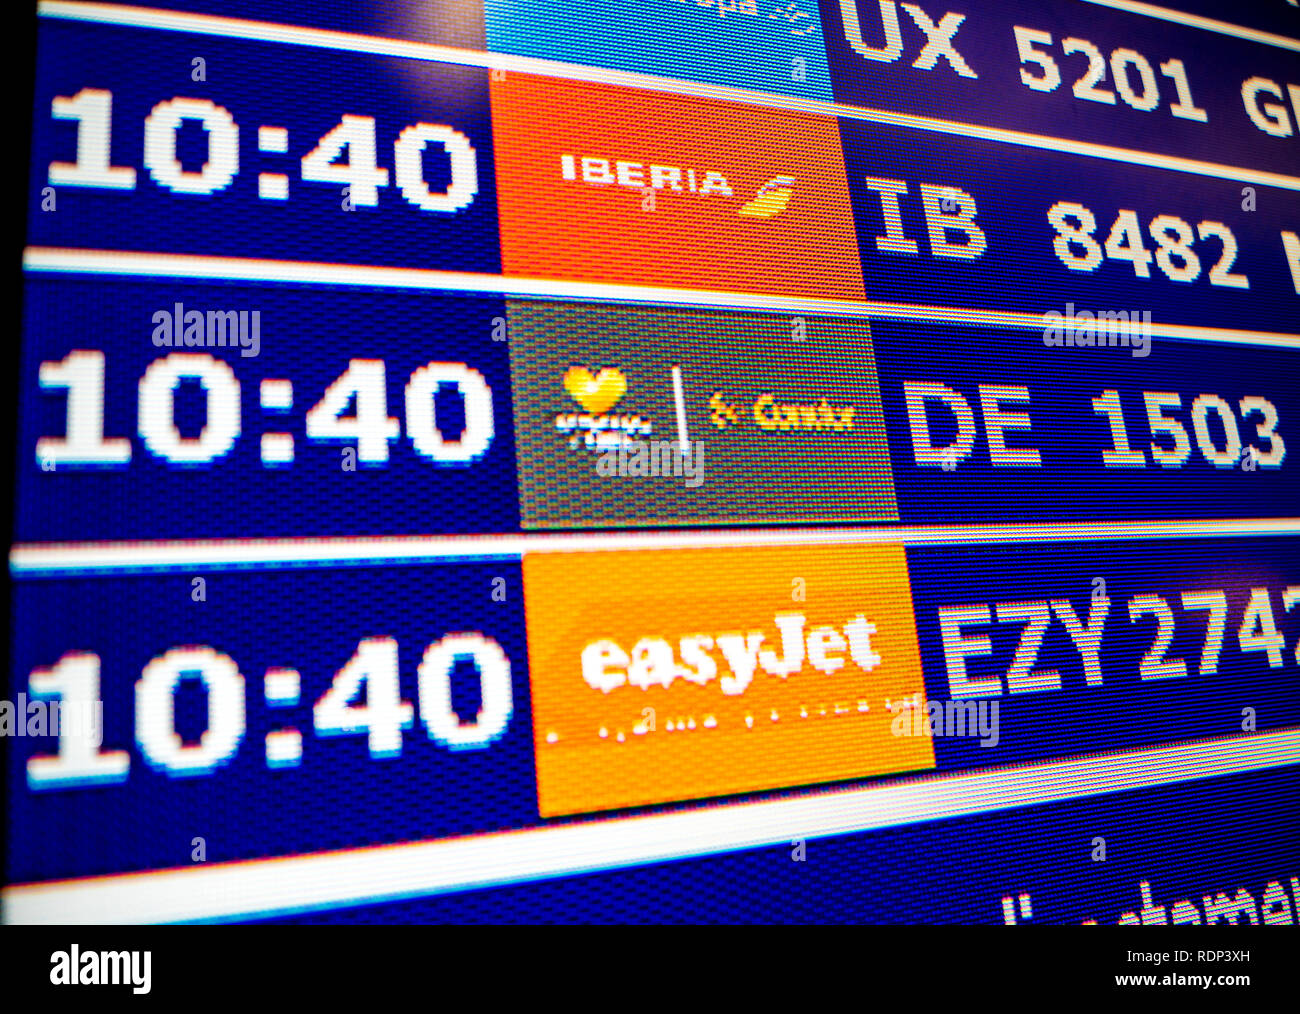 PALMA DE MALLORCA, SPAIN - MAY 11 2018: Close-up details of a typical airport information board with mutiple airlines hours departure gates and insignia for the boarding gate EasyJet Condor Iberia  Stock Photo